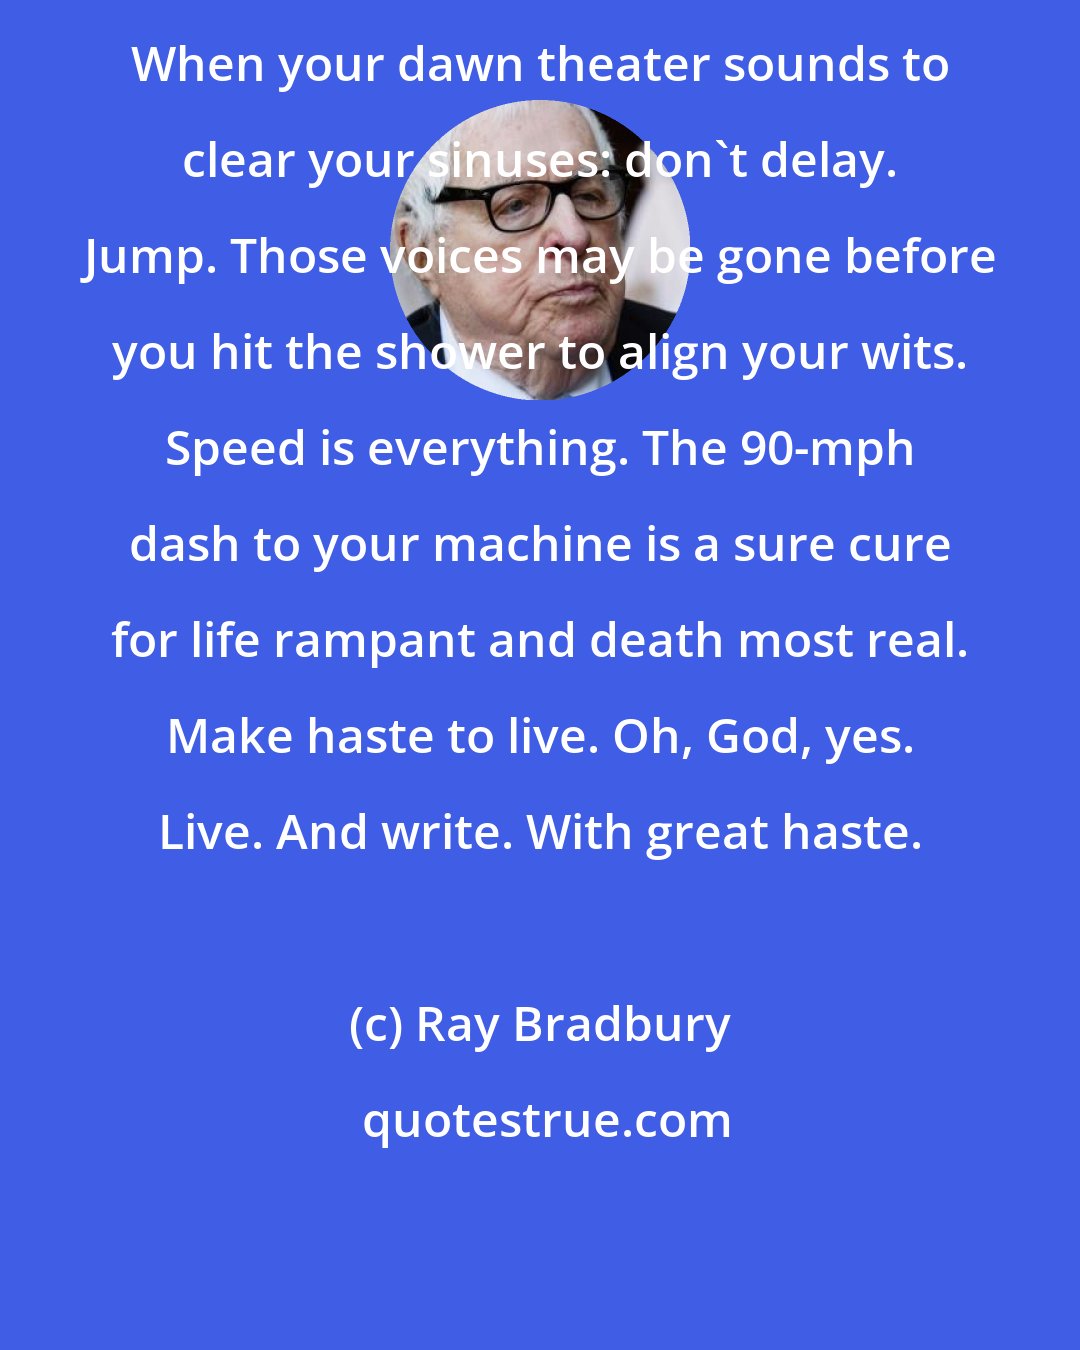 Ray Bradbury: When your dawn theater sounds to clear your sinuses: don't delay. Jump. Those voices may be gone before you hit the shower to align your wits. Speed is everything. The 90-mph dash to your machine is a sure cure for life rampant and death most real. Make haste to live. Oh, God, yes. Live. And write. With great haste.